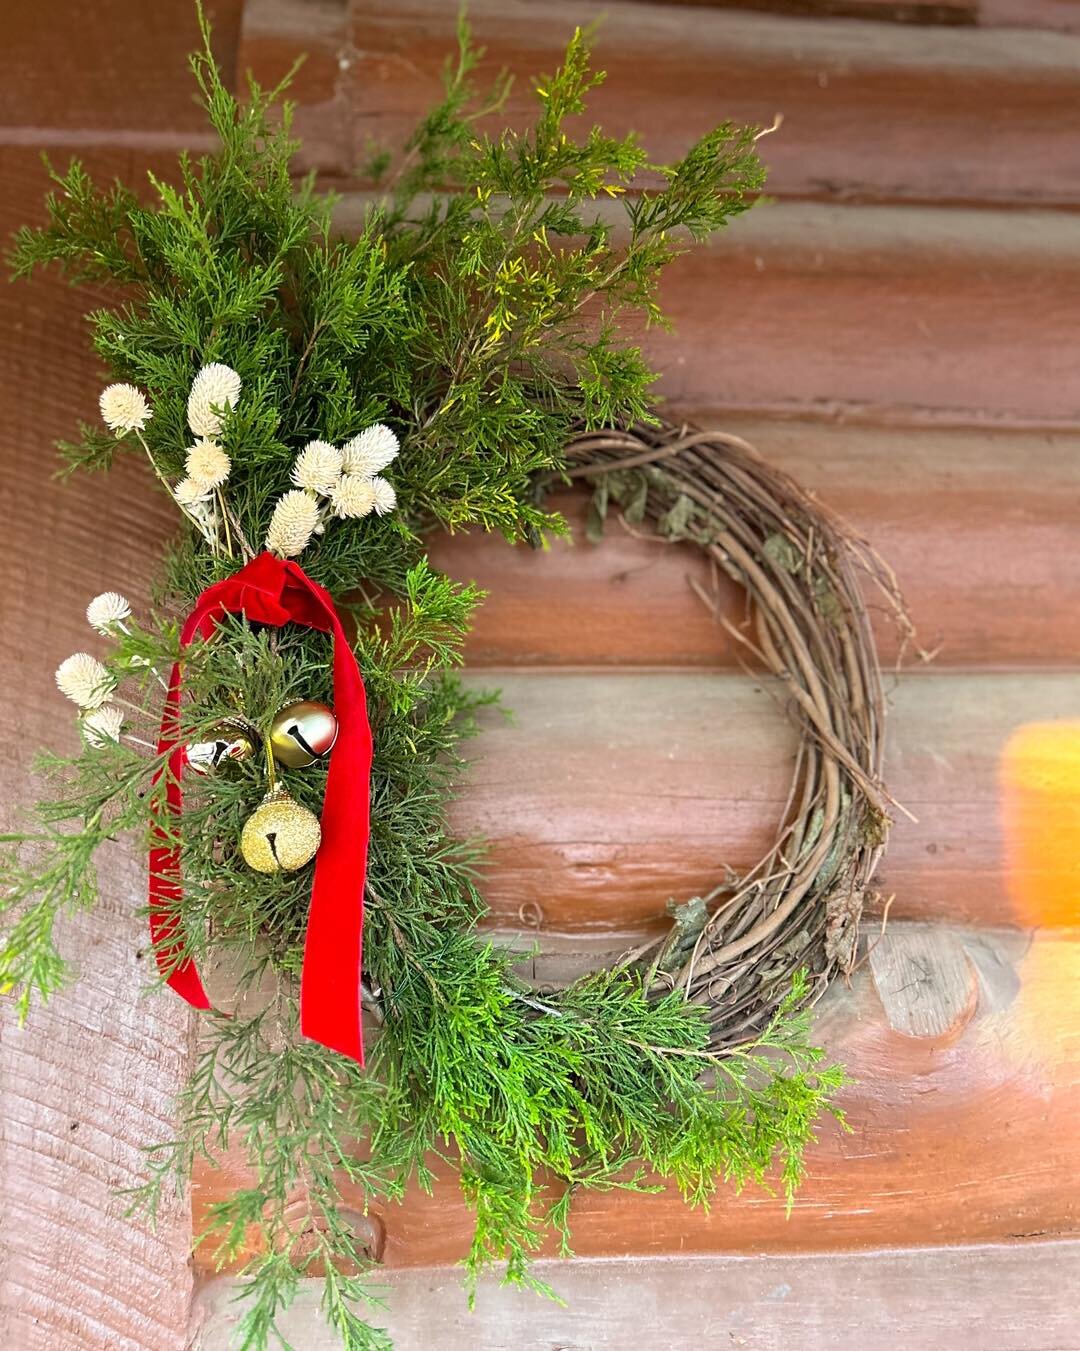 I&rsquo;ve now made the switch to winter wreaths! Not much can beat the fragrance of a fresh evergreen! And add a velvet ribbon, some dried flowers and a jingle bell, and I&rsquo;m sold every time! 

I only sell these as a special order, so here&rsqu